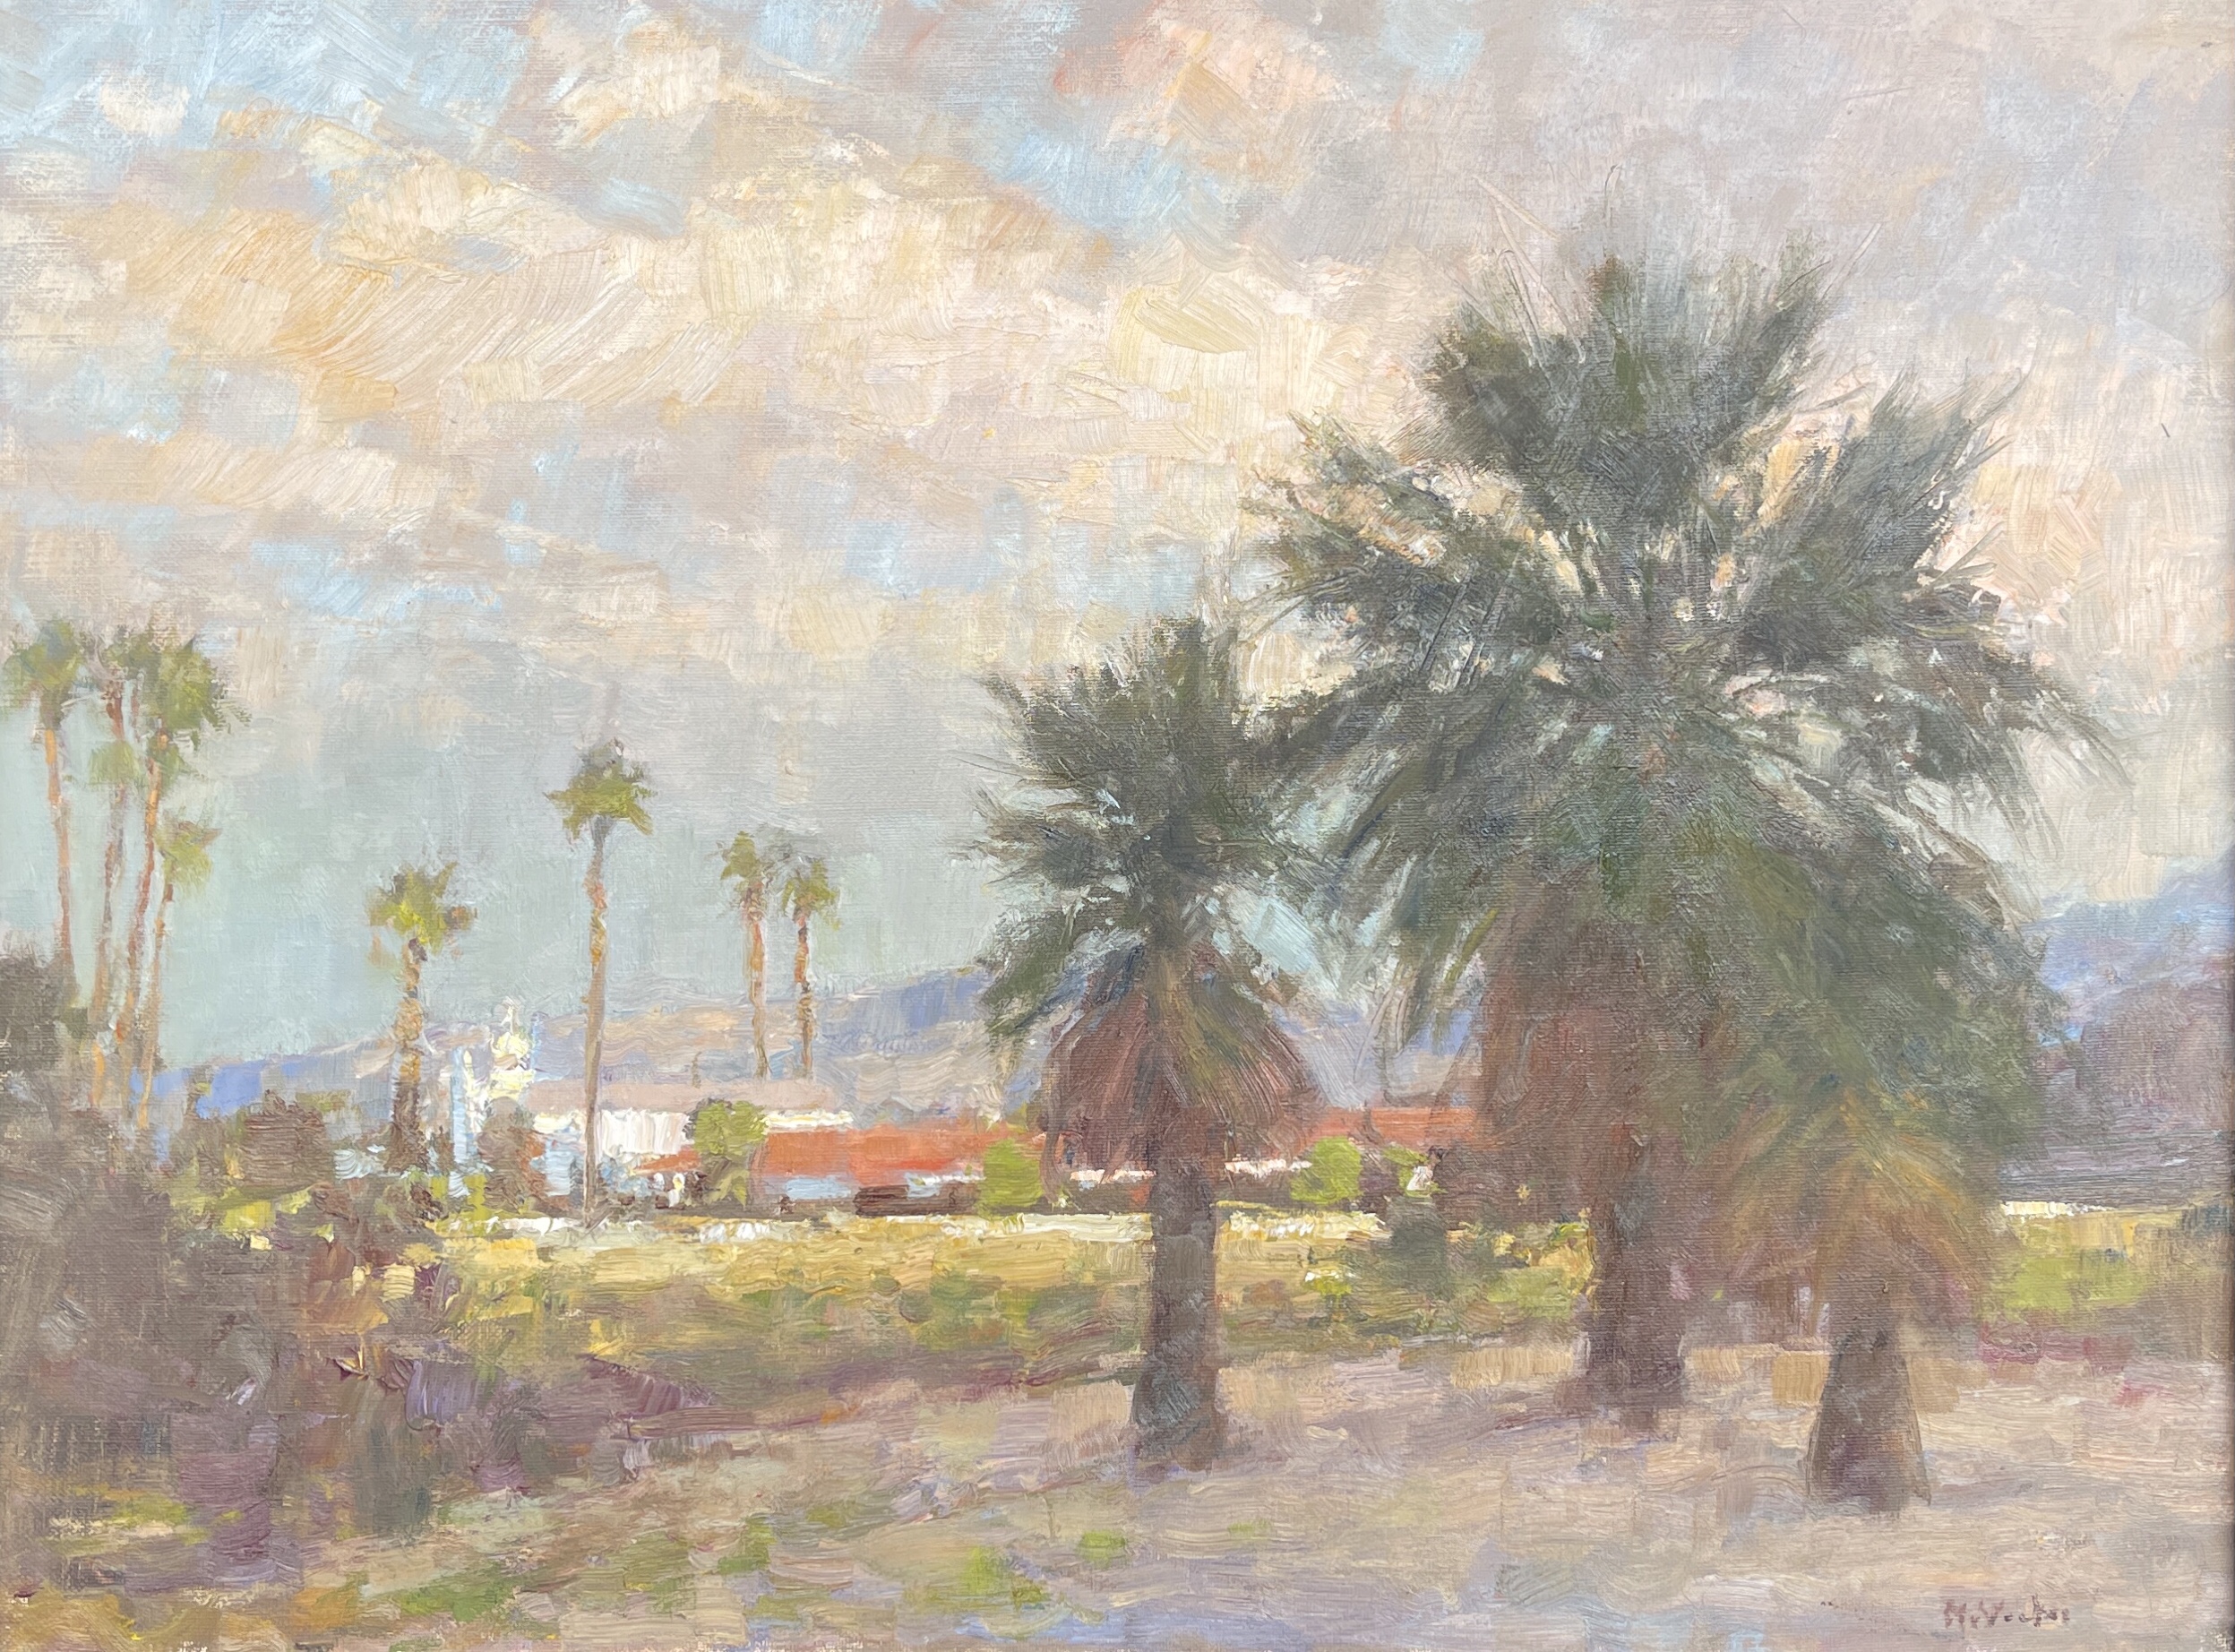 plein air painting - 3rd Place: “Palms, Shadow & Light” by Jim McVicker